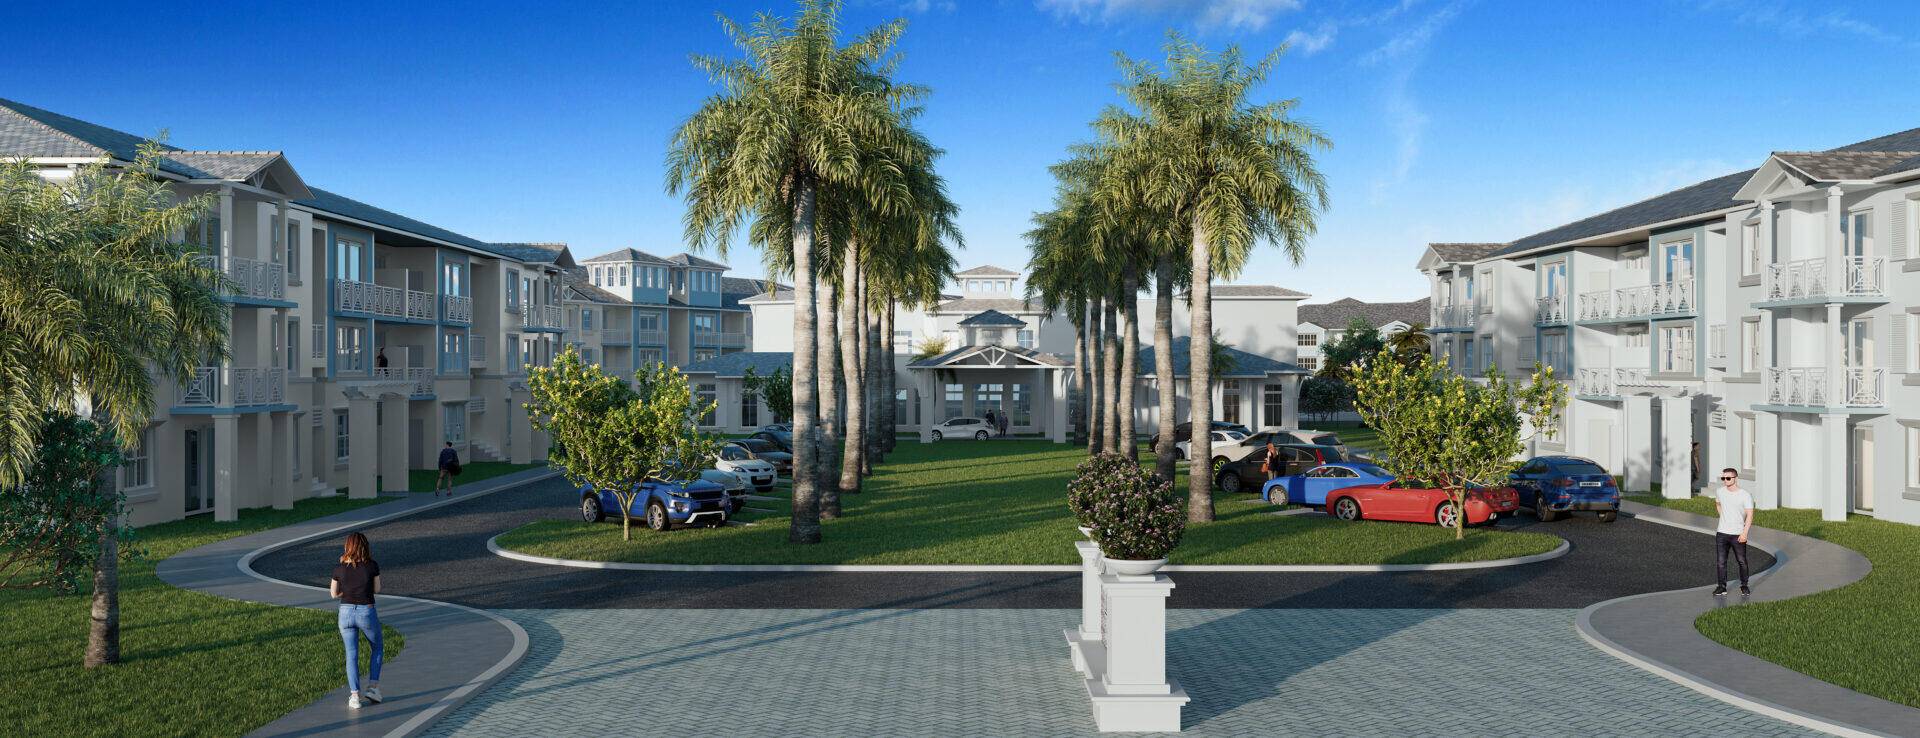 Welcome to grand resort style living, featuring beautiful residences, a massive pool deck with 7, 000 square foot pool, a magnificent two story clubhouse.